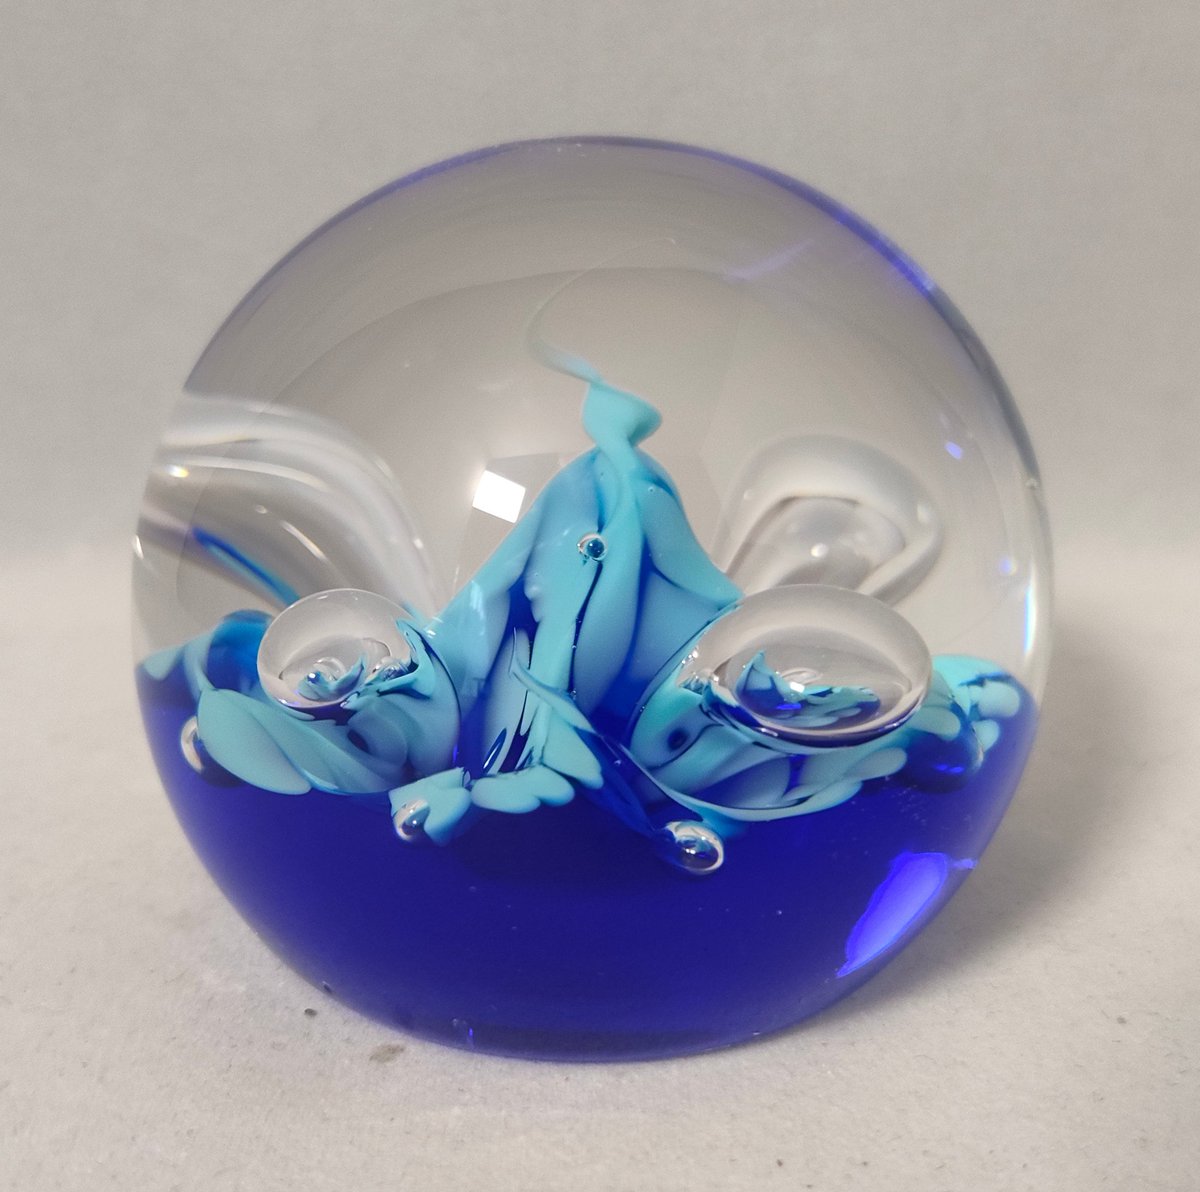 Excited to share the latest addition to my #etsy shop: Collectable Caithness Glass Paperweight - Moonflower - Blue etsy.me/43jqJvb #smallpaperweight #glasspaperweight #collectableglass #caithnessglass #scottishglass #glass #silverdragonfinds